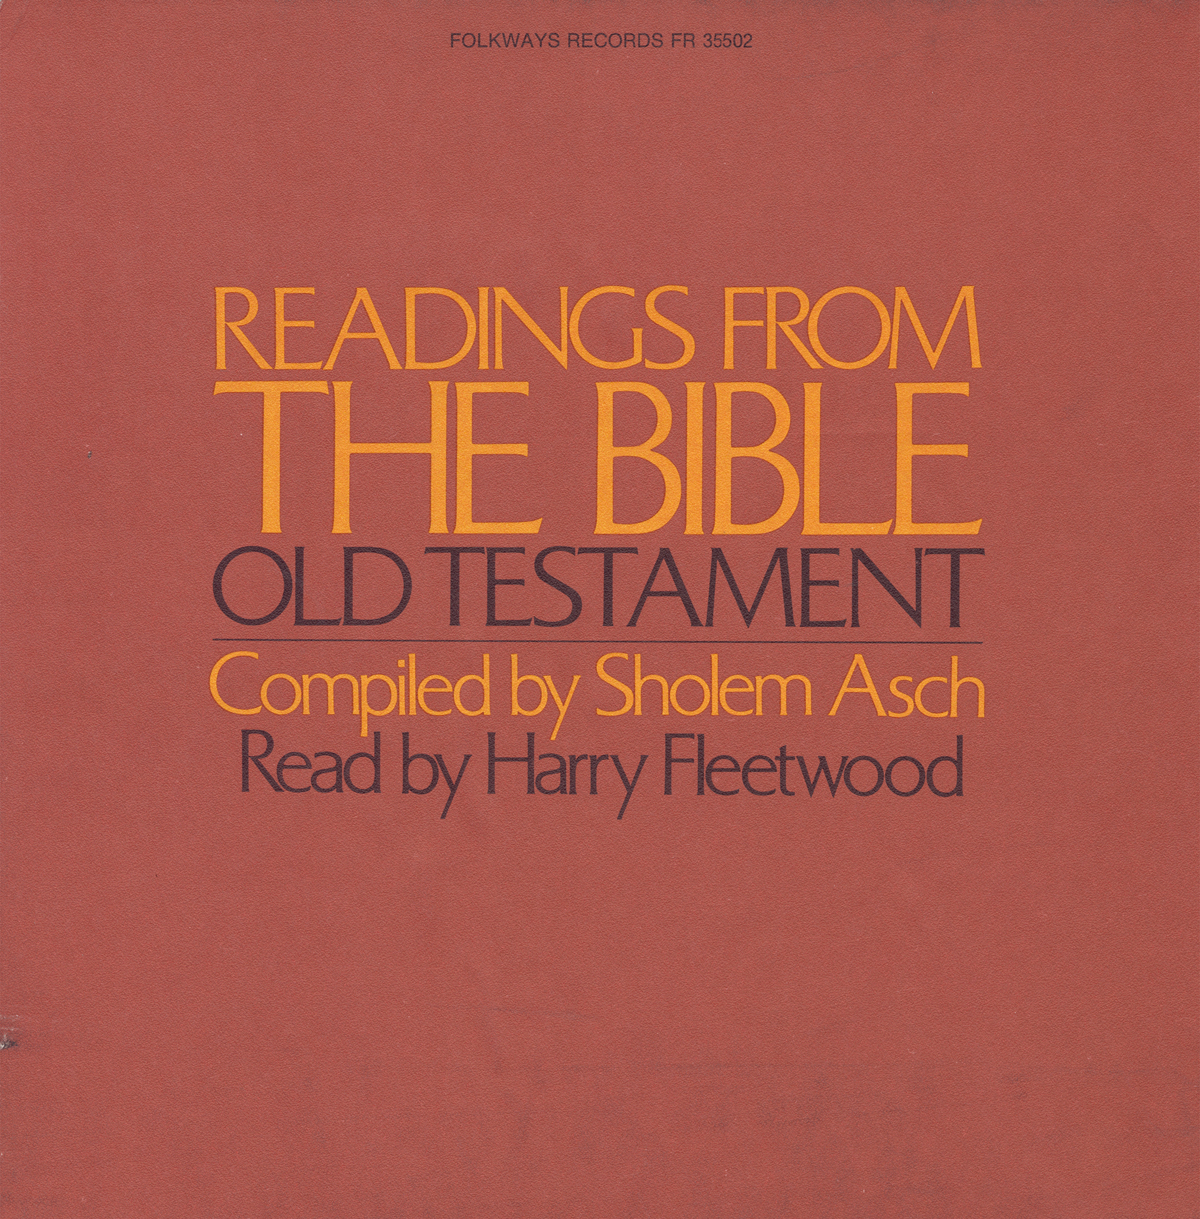 READINGS FROM THE BIBLE - OLD TESTAMENT